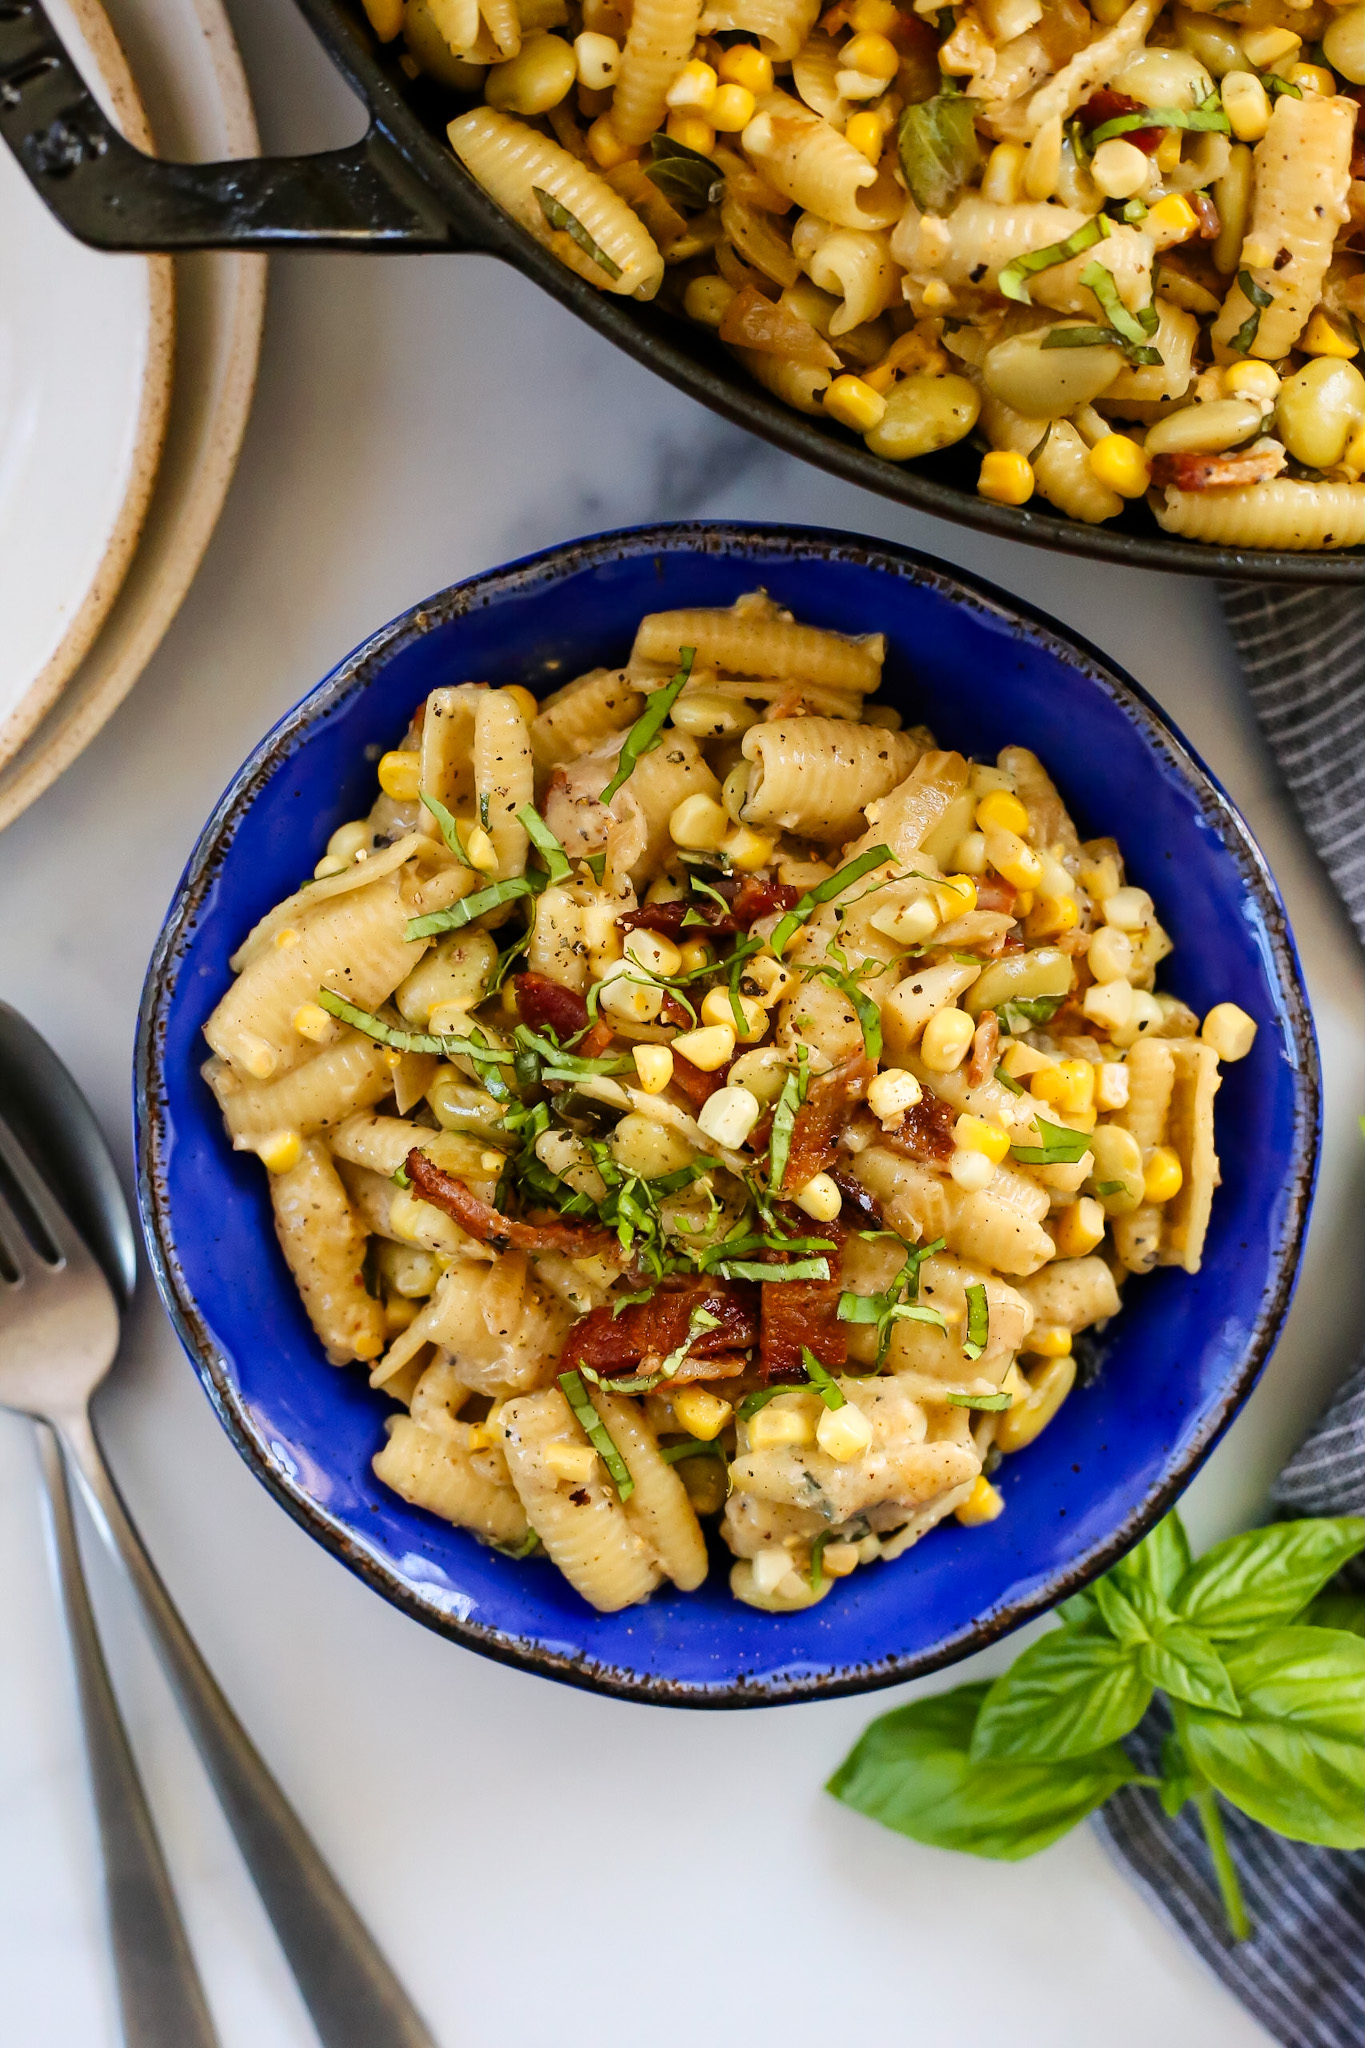 Overhead view of a creamy corn pasta recipe served in a blue glazed ceramic bowl, garnished with crumbles of bacon, fresh basil, and sweet corn kernels